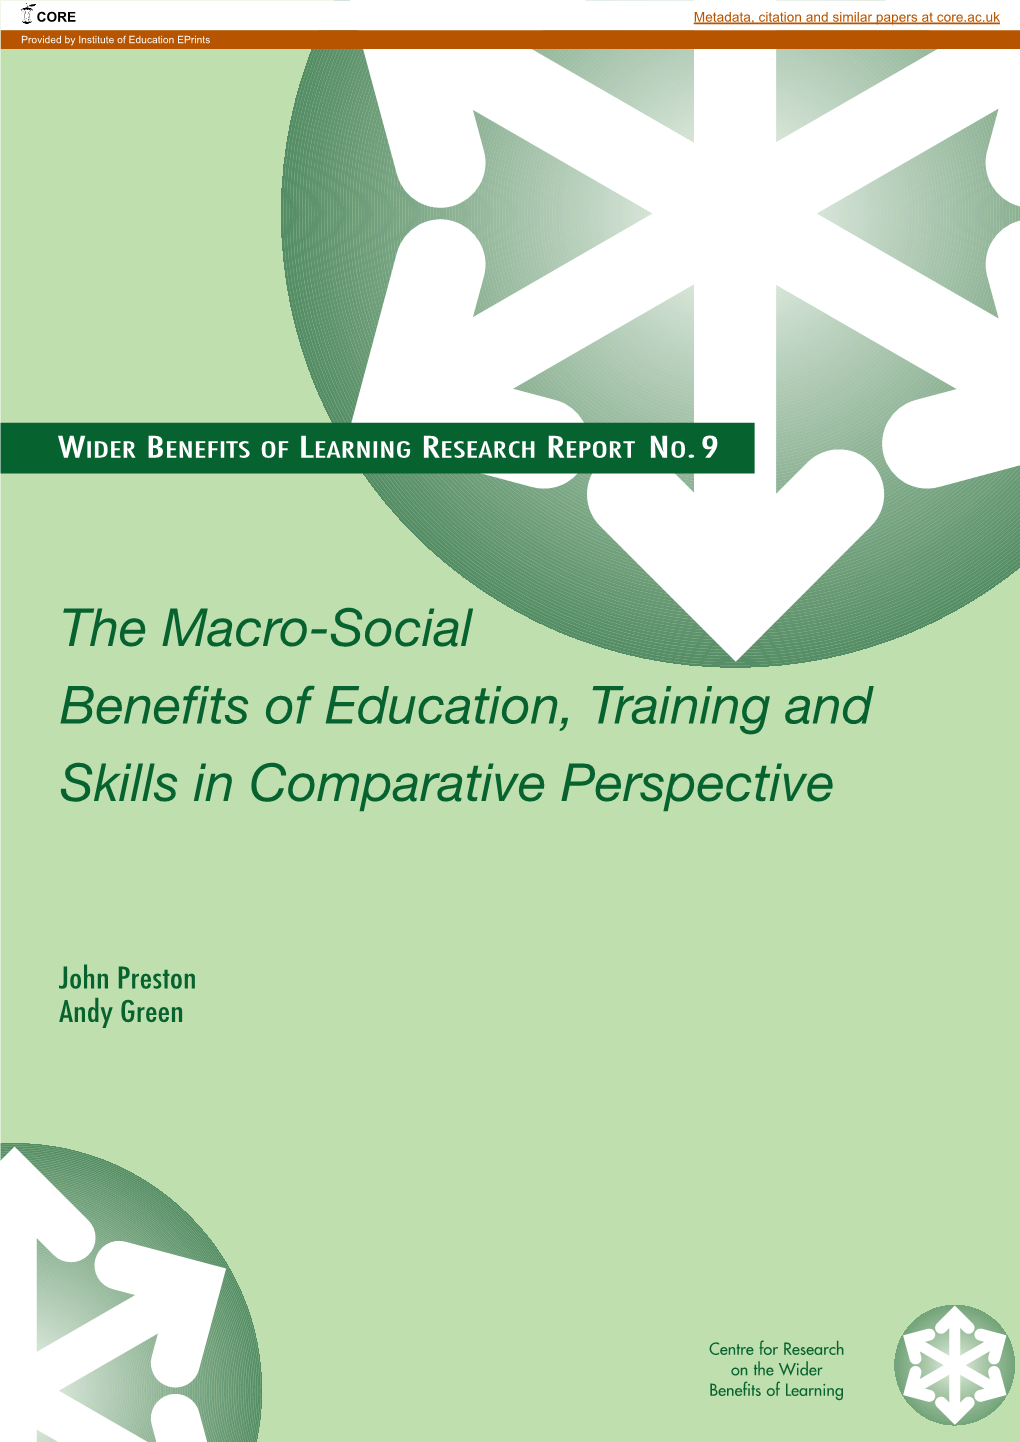 The Macro-Social Benefits of Education, Training and Skills in Comparative Perspective